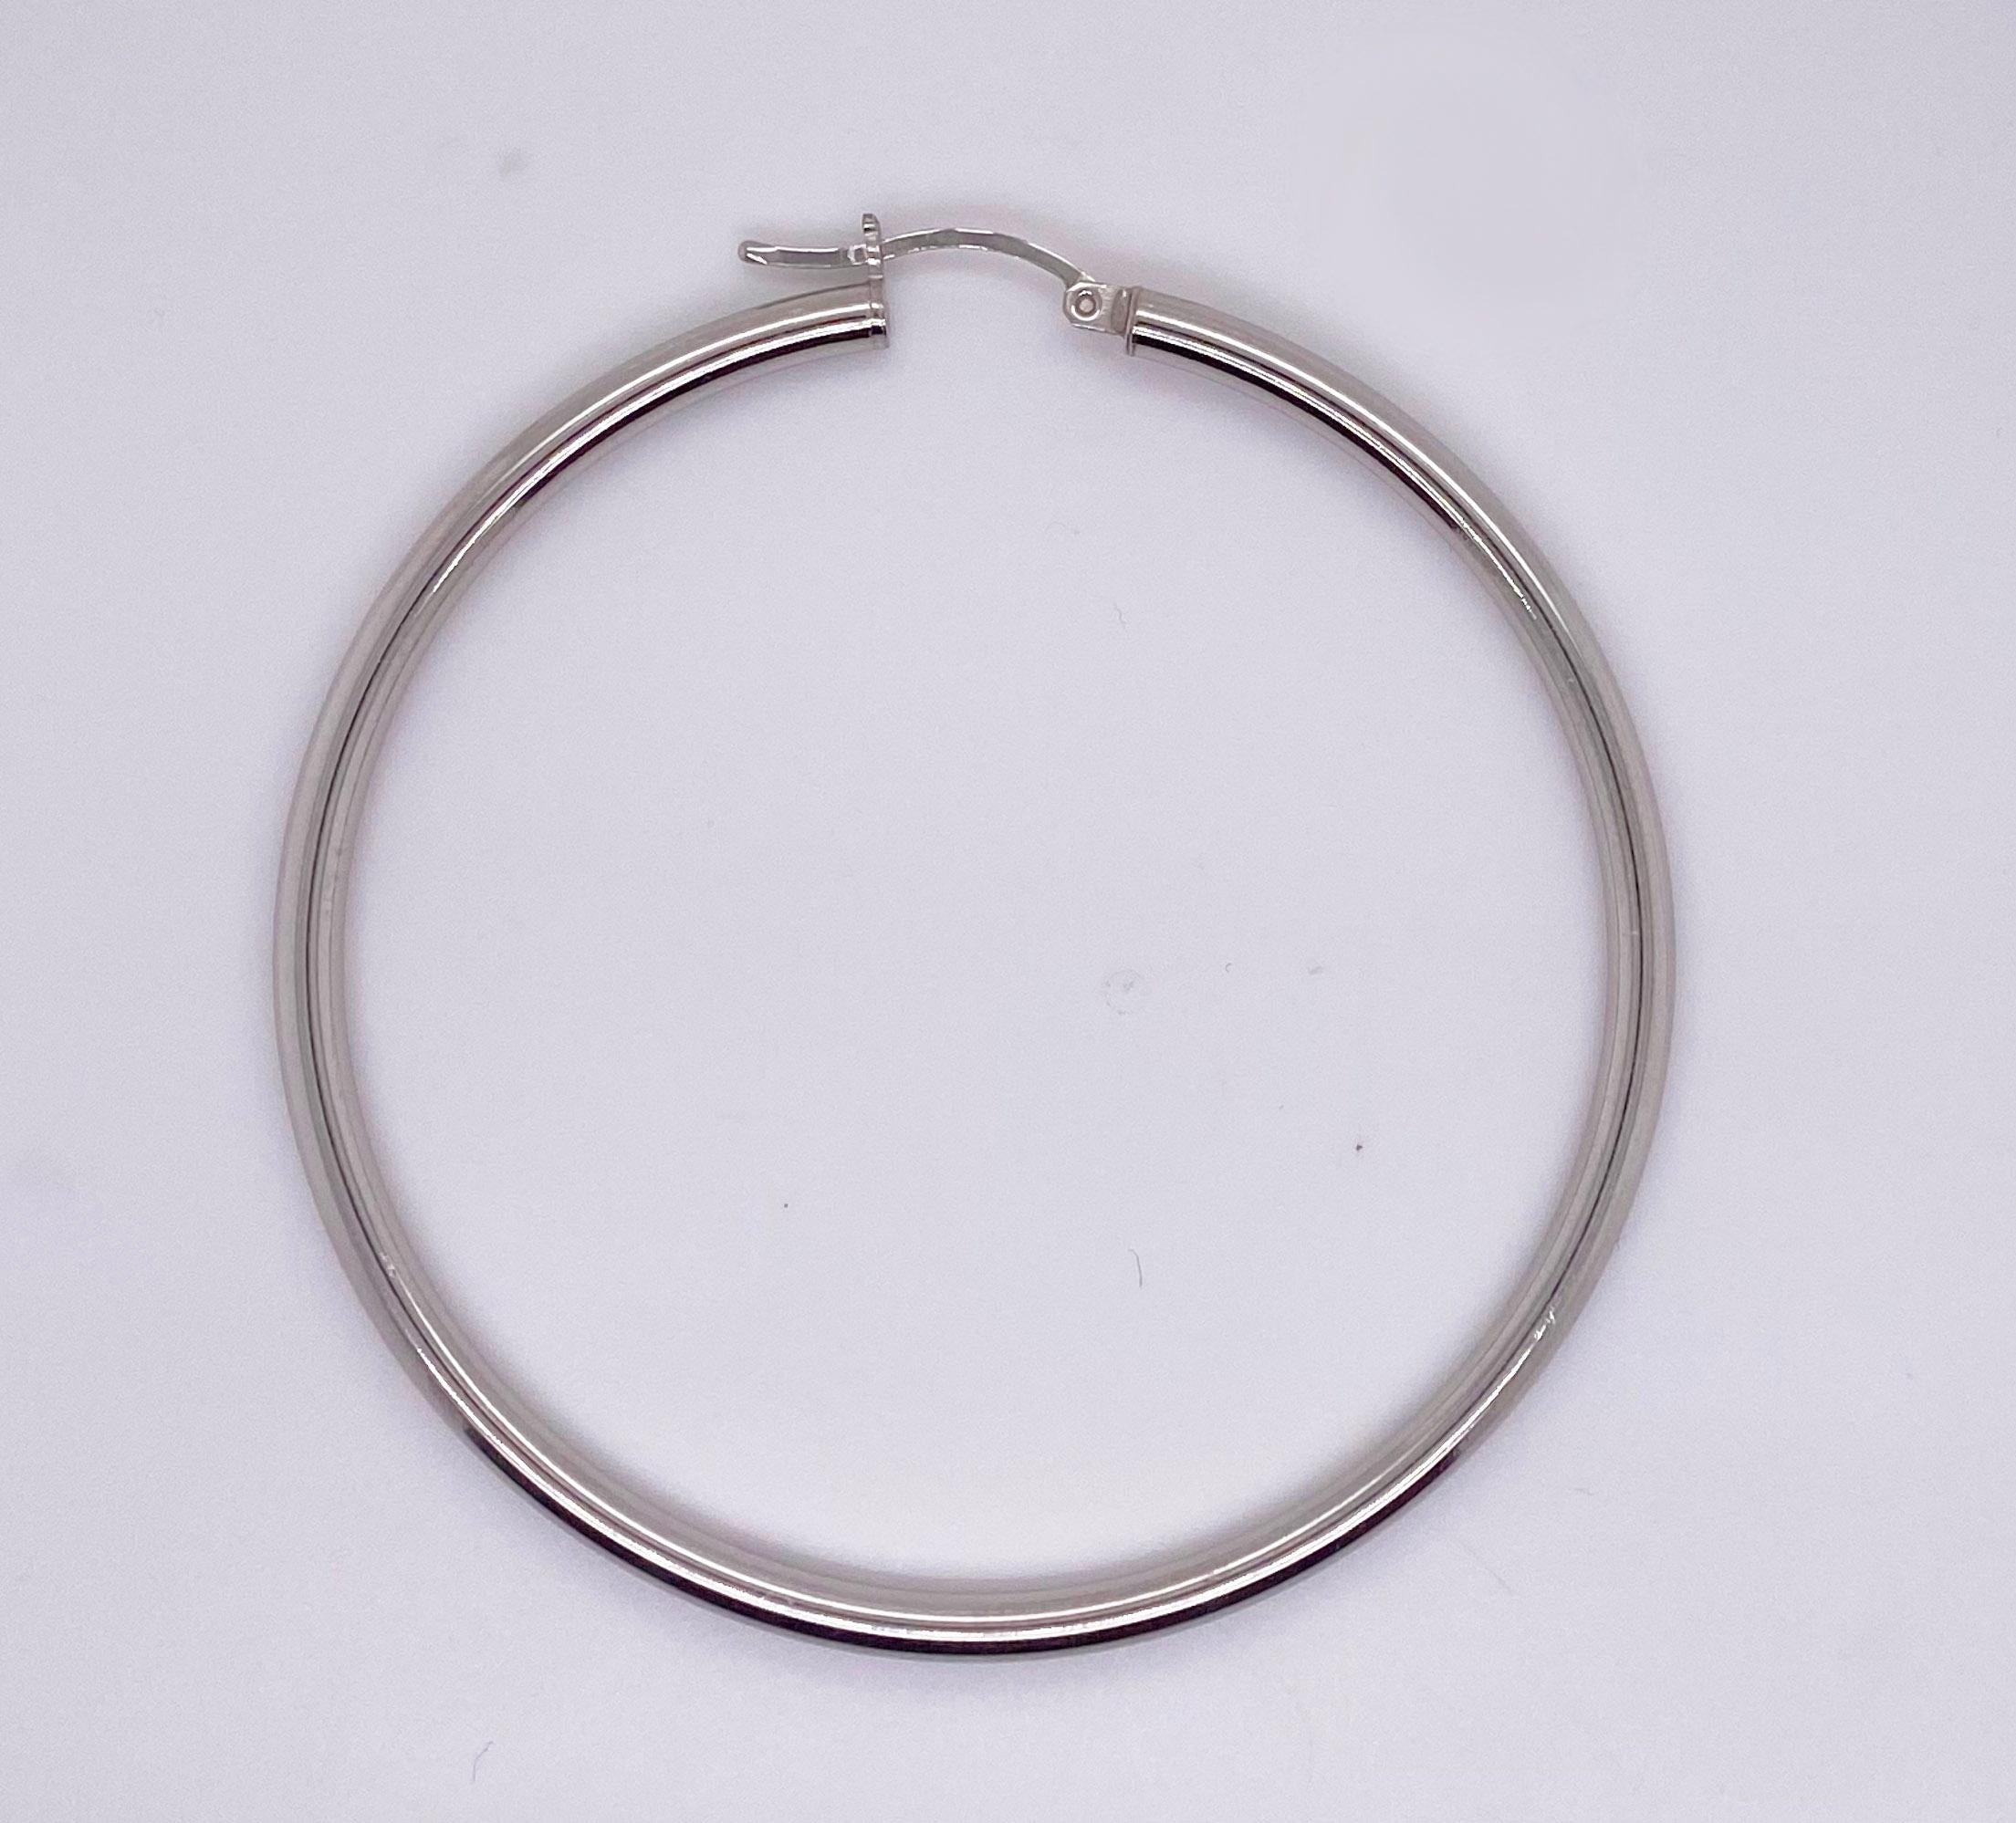 Hoop Earrings are so popular right now and 2.5 inch diameter hoops are the perfect size-not too small and not too big! They are great for a staple earring that you can wear everyday. The 3 millimeter width is also perfect and the earrings are light